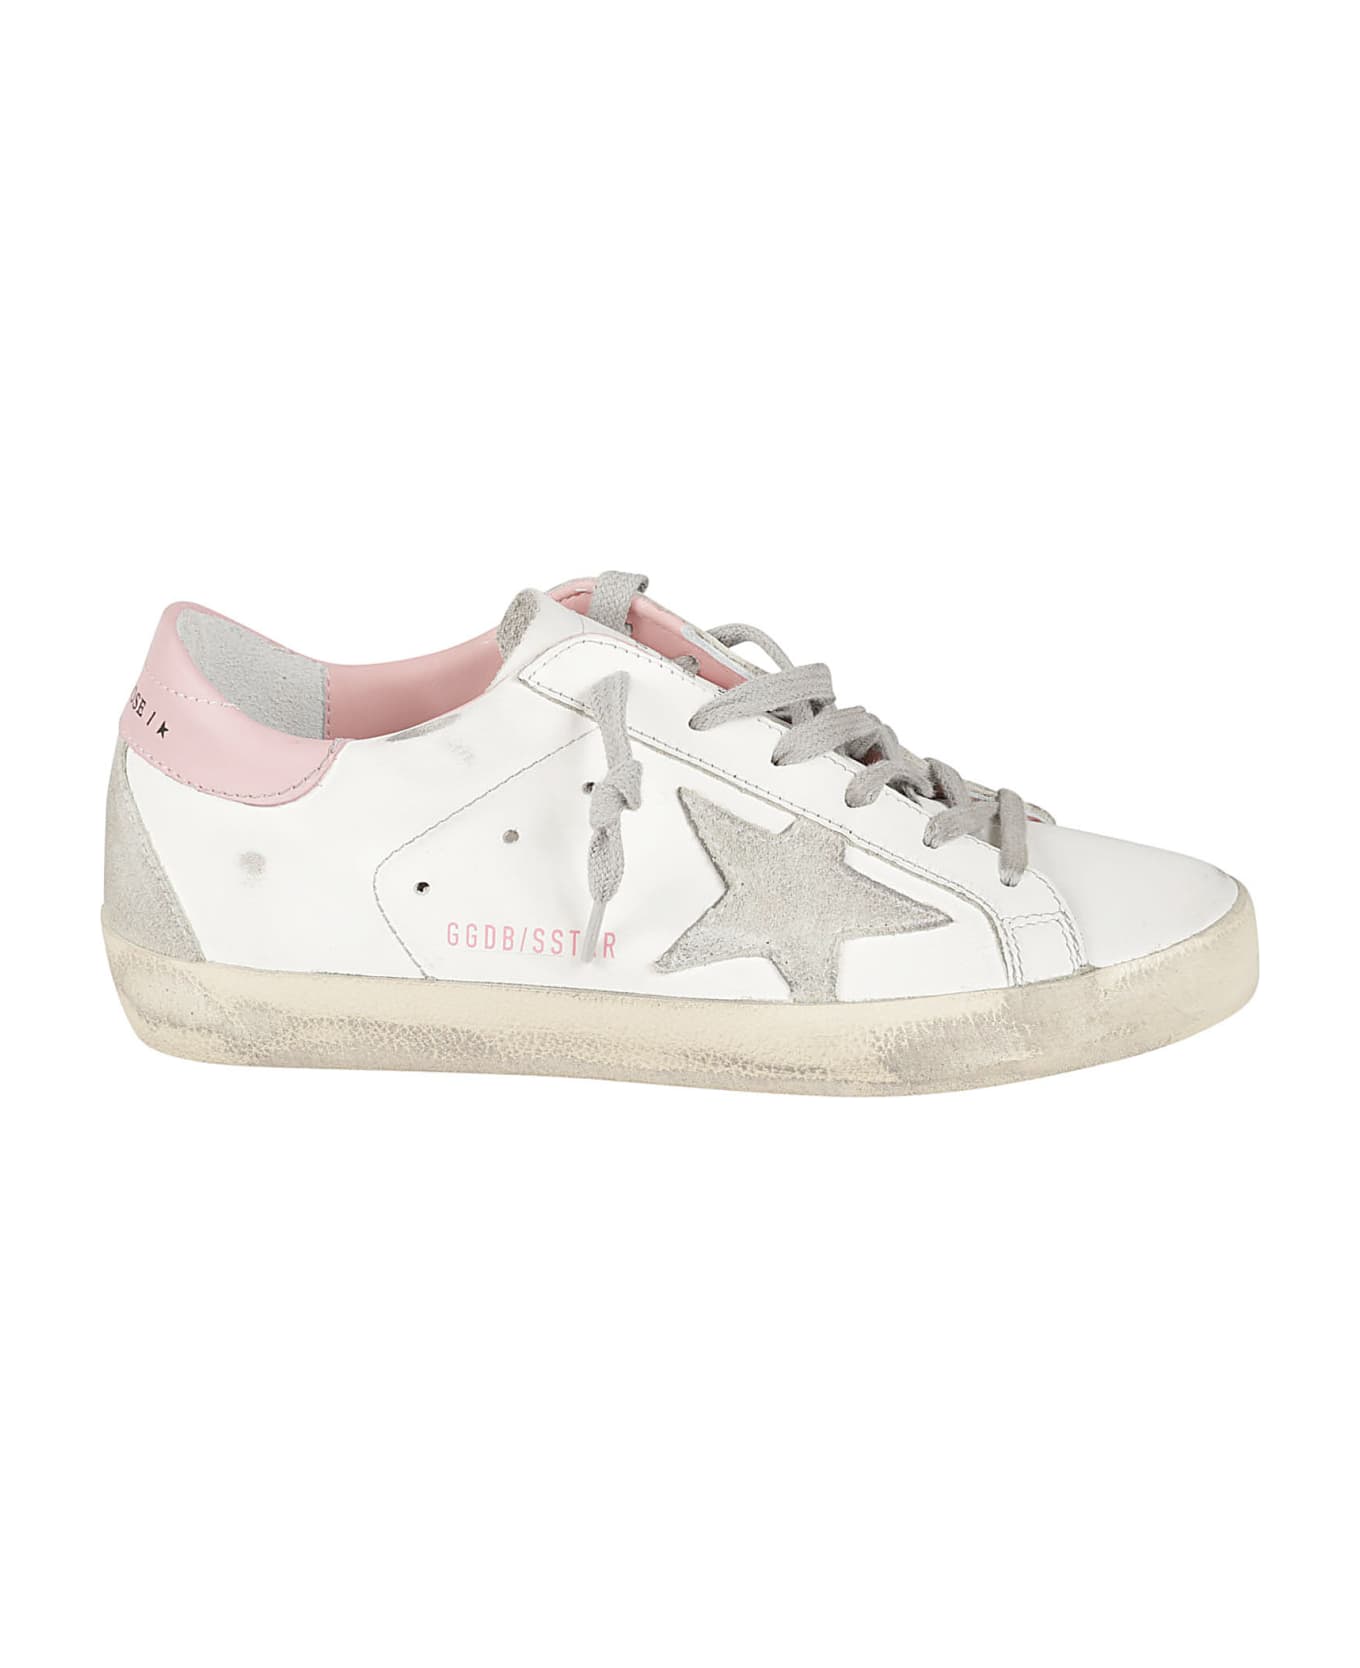 Golden Goose Ball Star Sneakers - White, pink